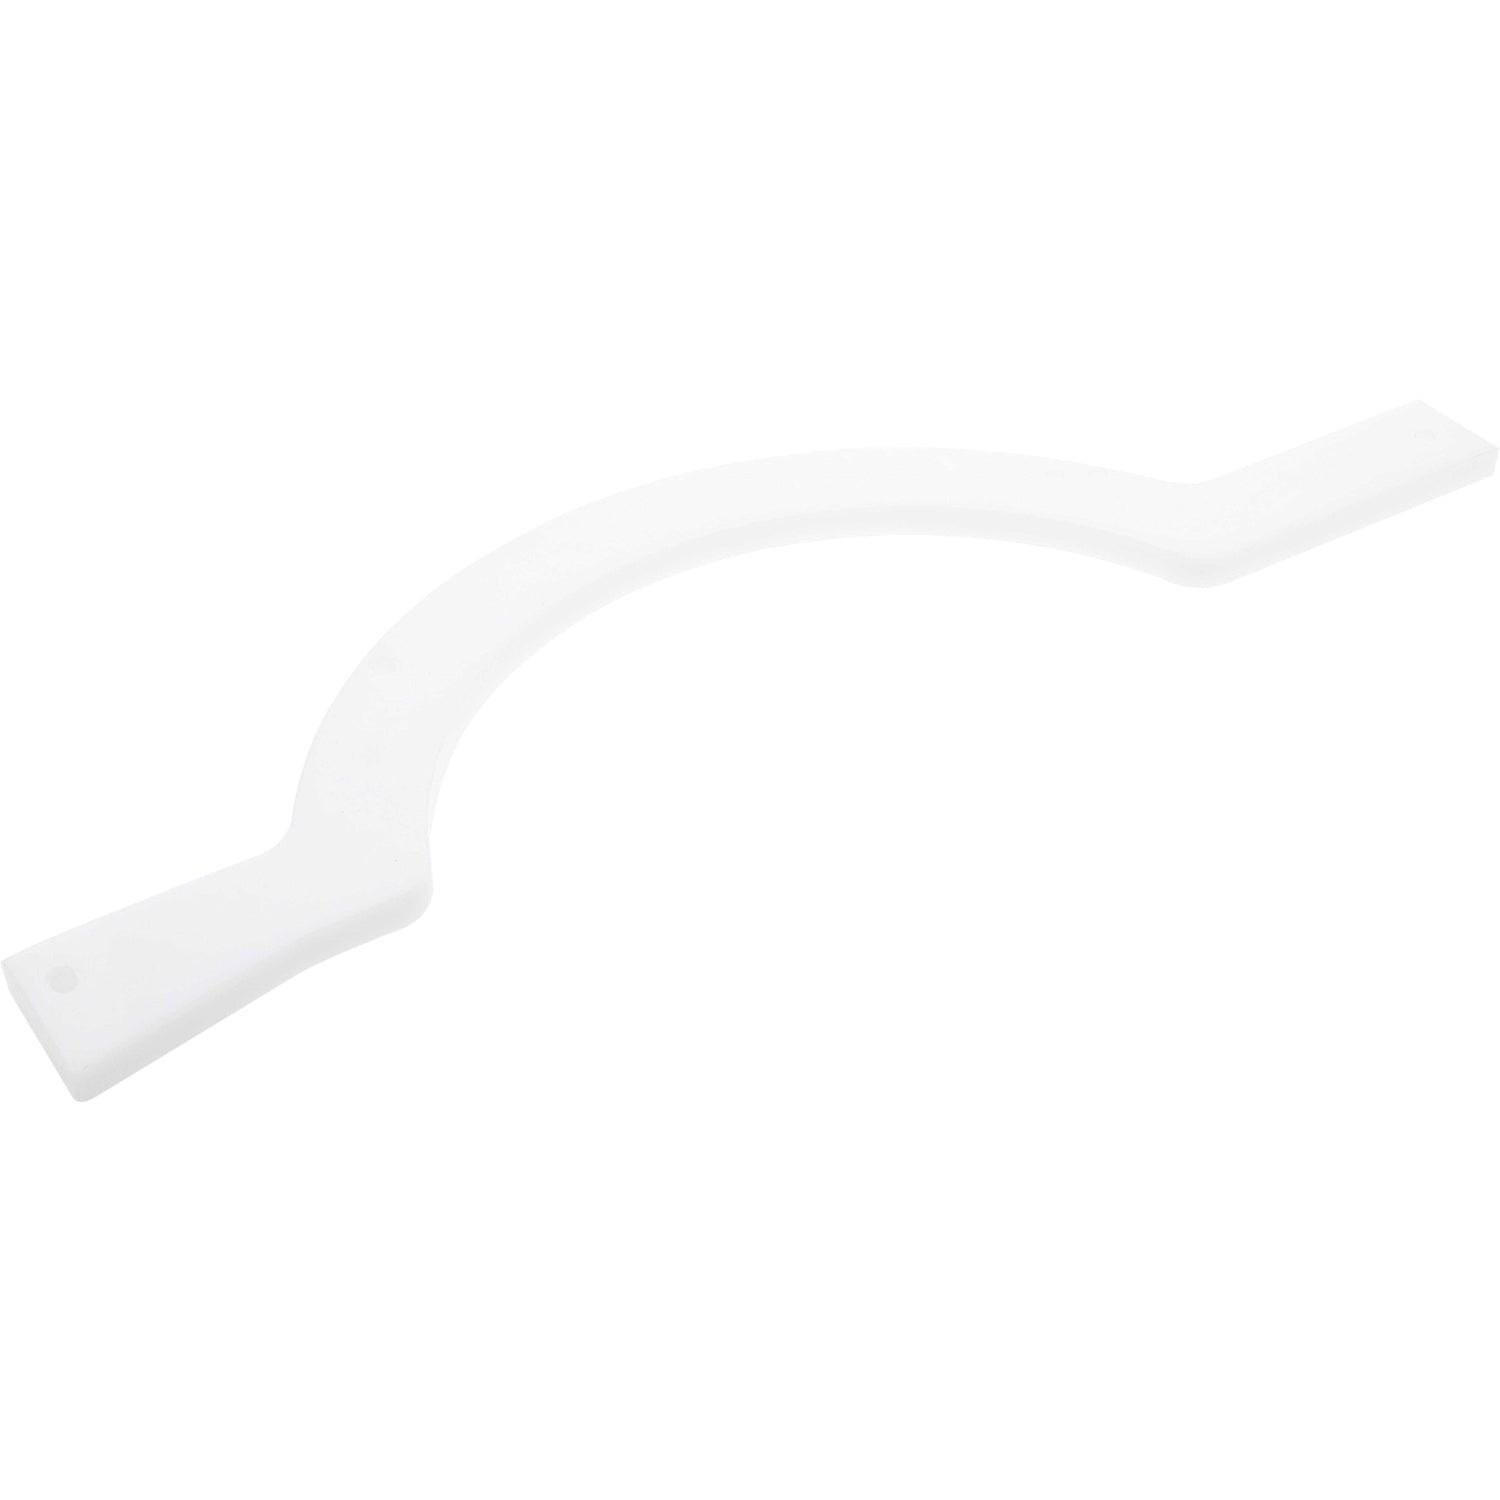 White, flat, curved rail made of HDPE with through holes on white background. 